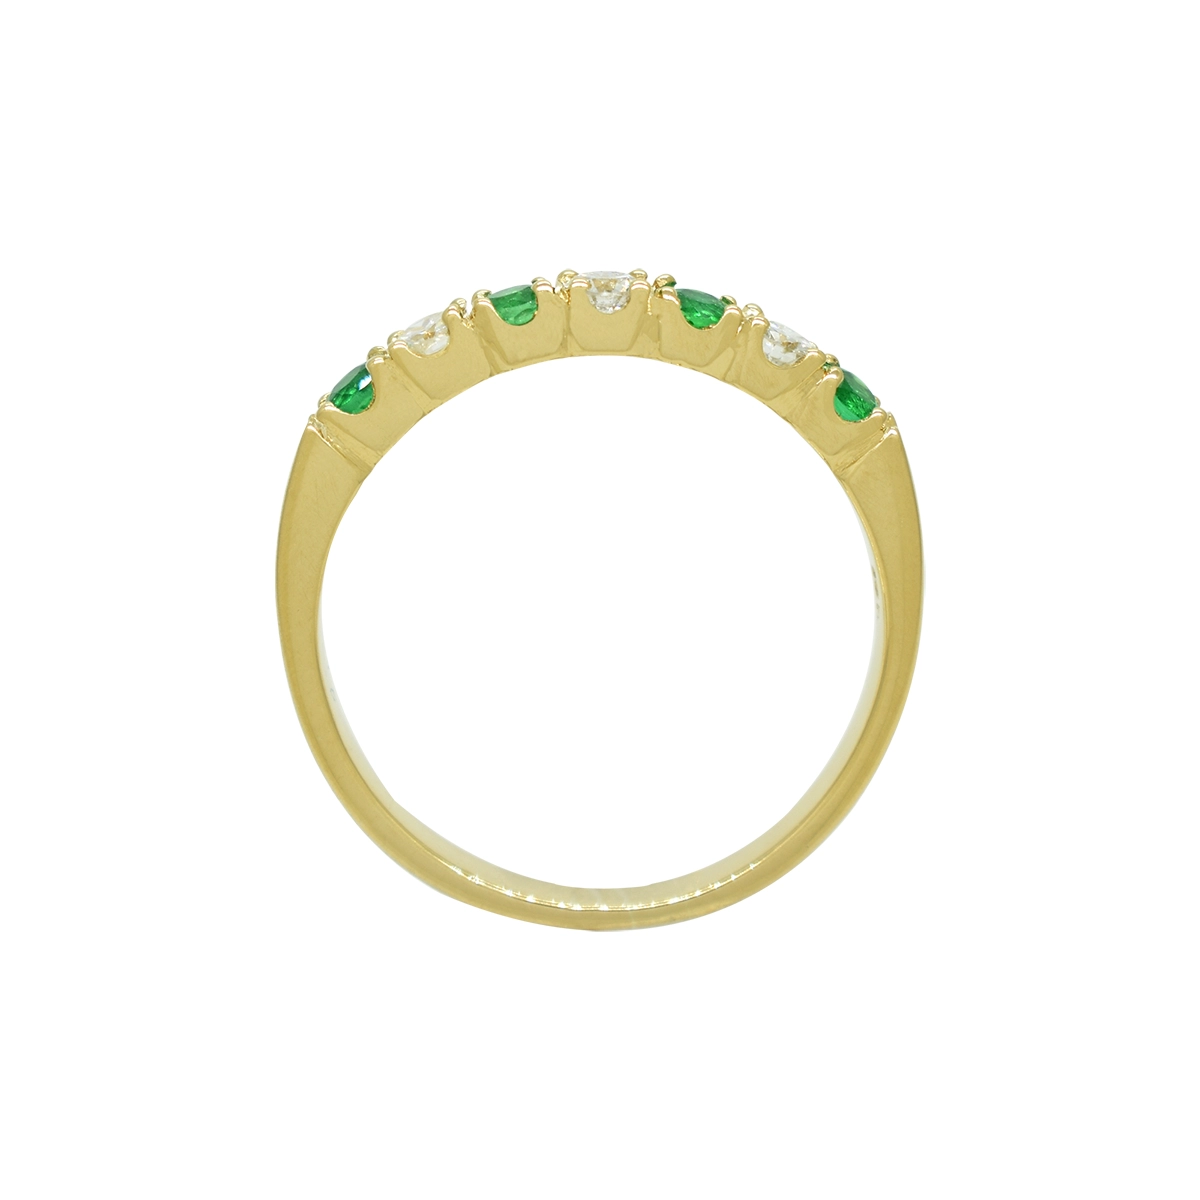 Both the emeralds and diamonds are set in a classic prong setting that holds each stone securely in place while allowing full light to enter and enhance their brilliance